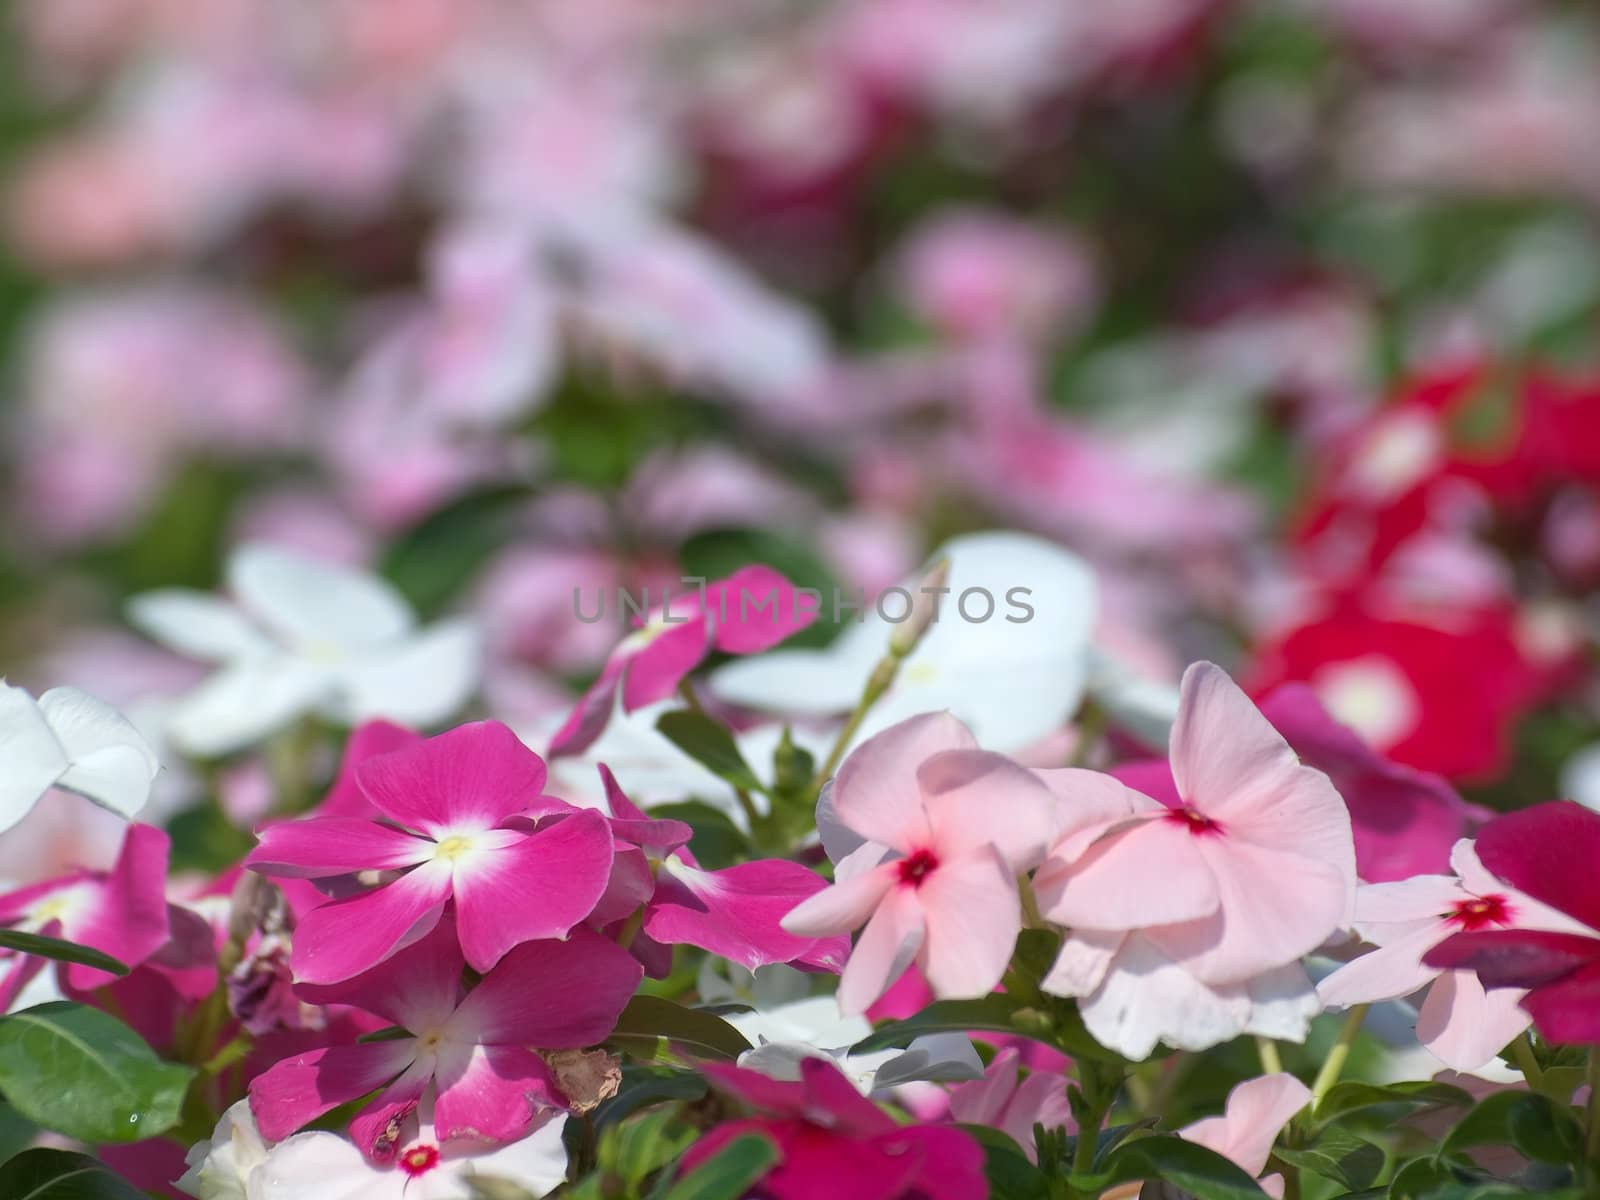 The field of periwinkle flower colorful and beautiful